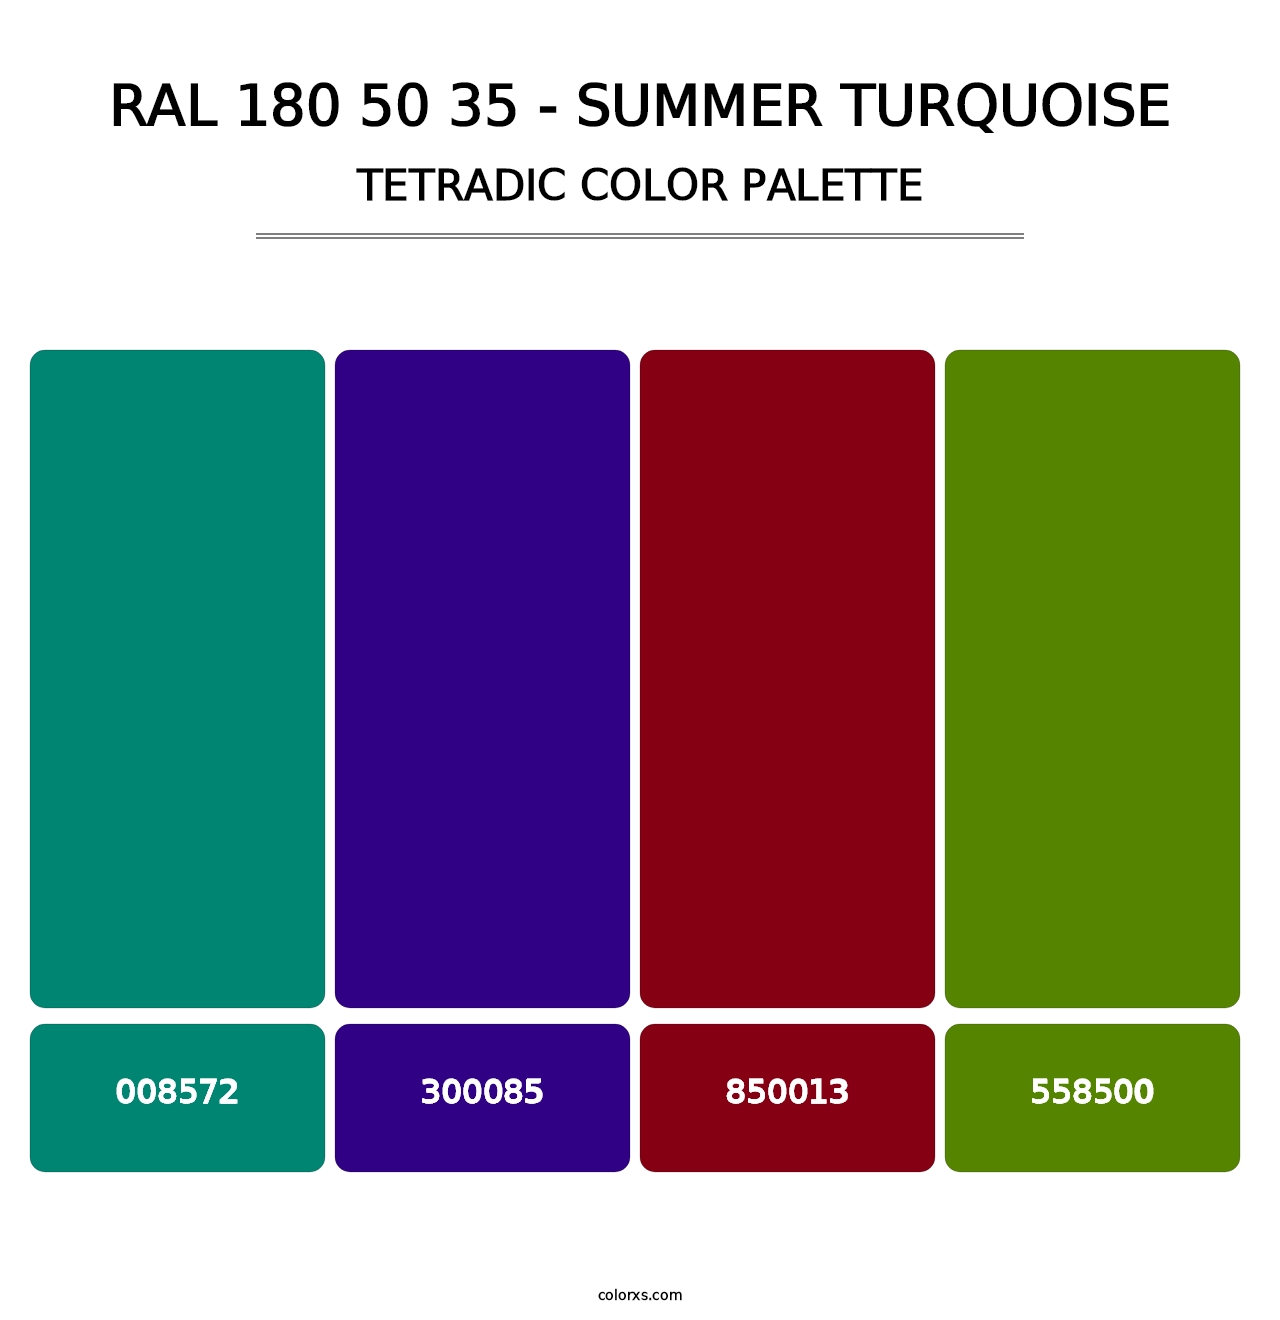 RAL 180 50 35 - Summer Turquoise - Tetradic Color Palette